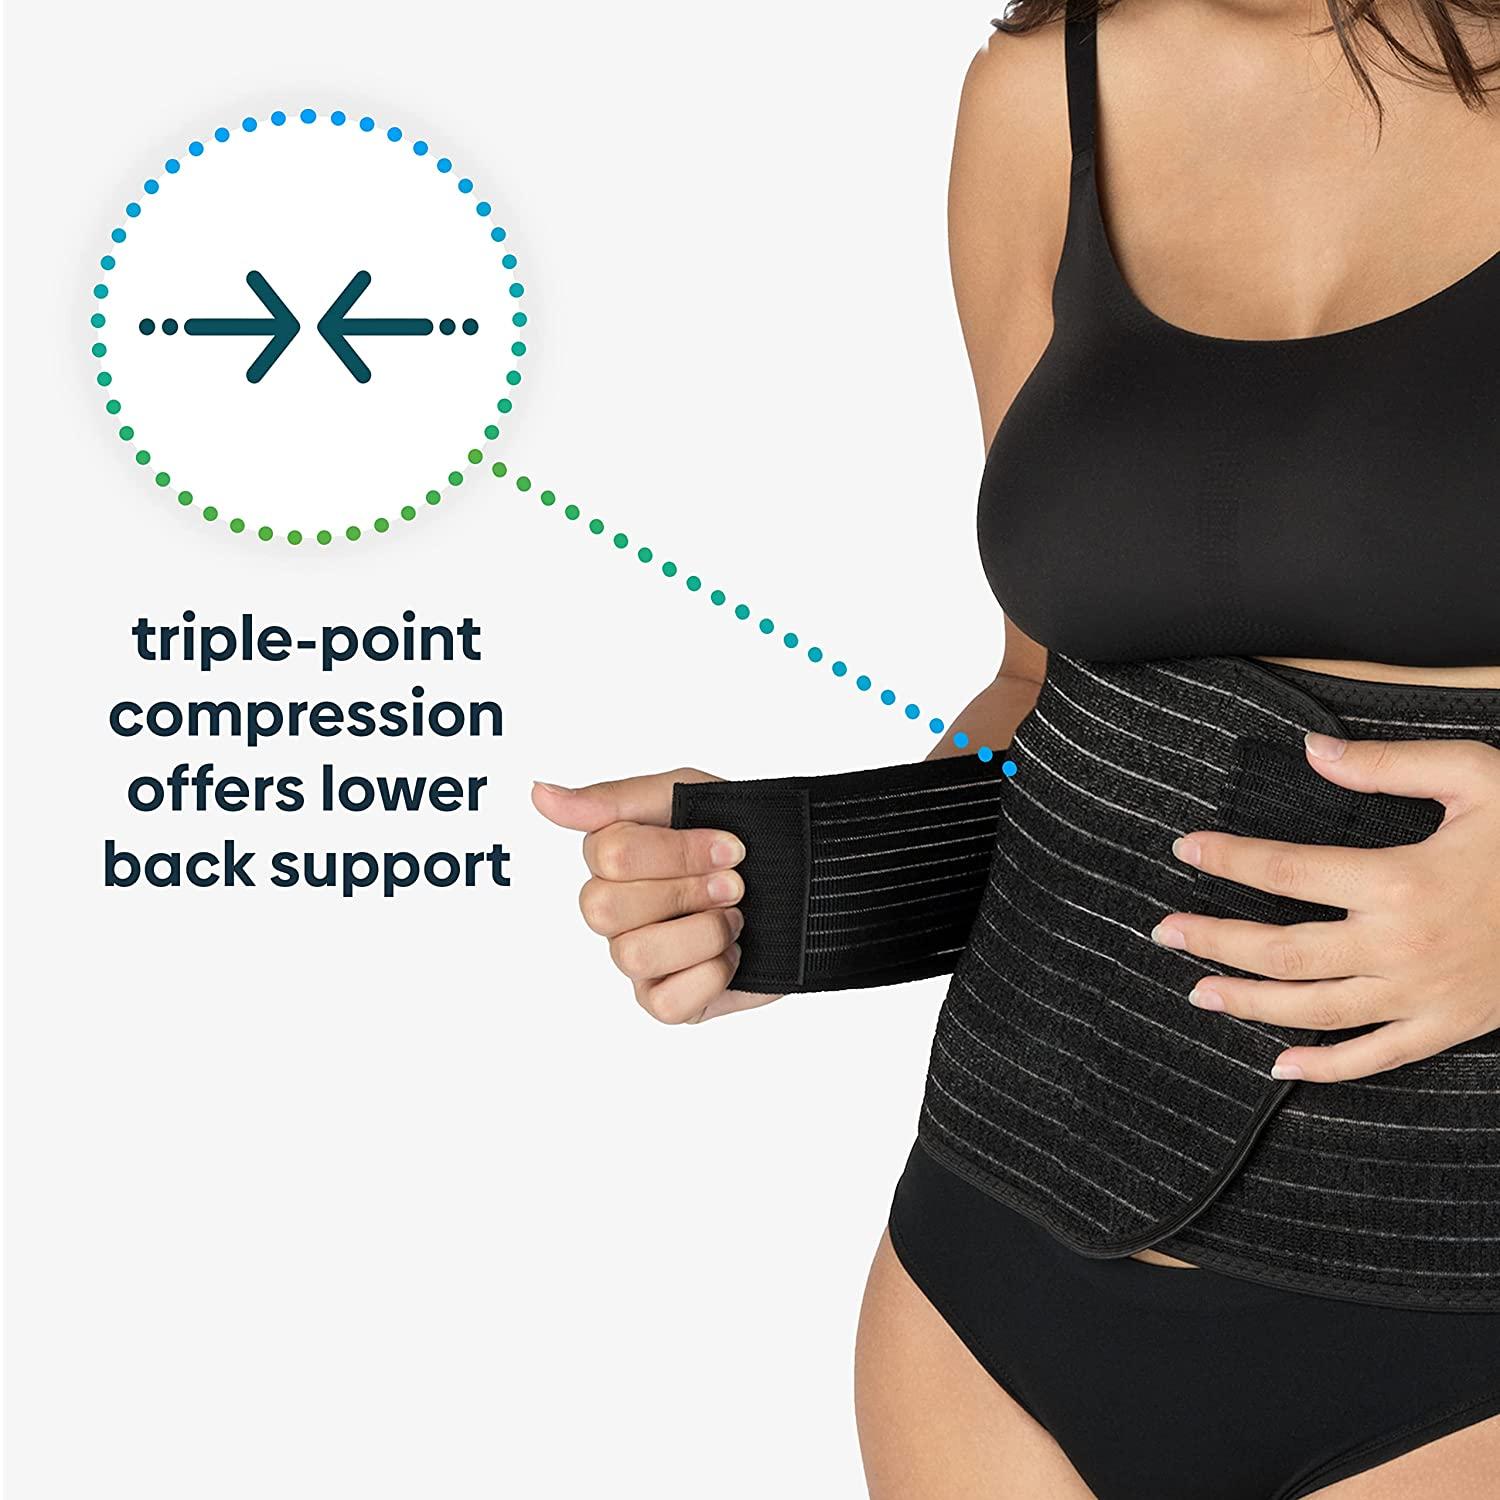 UpSpring Shrinkx Belly Postpartum Belly Wrap With Bamboo Charcoal Fiber  Size L/XL Black